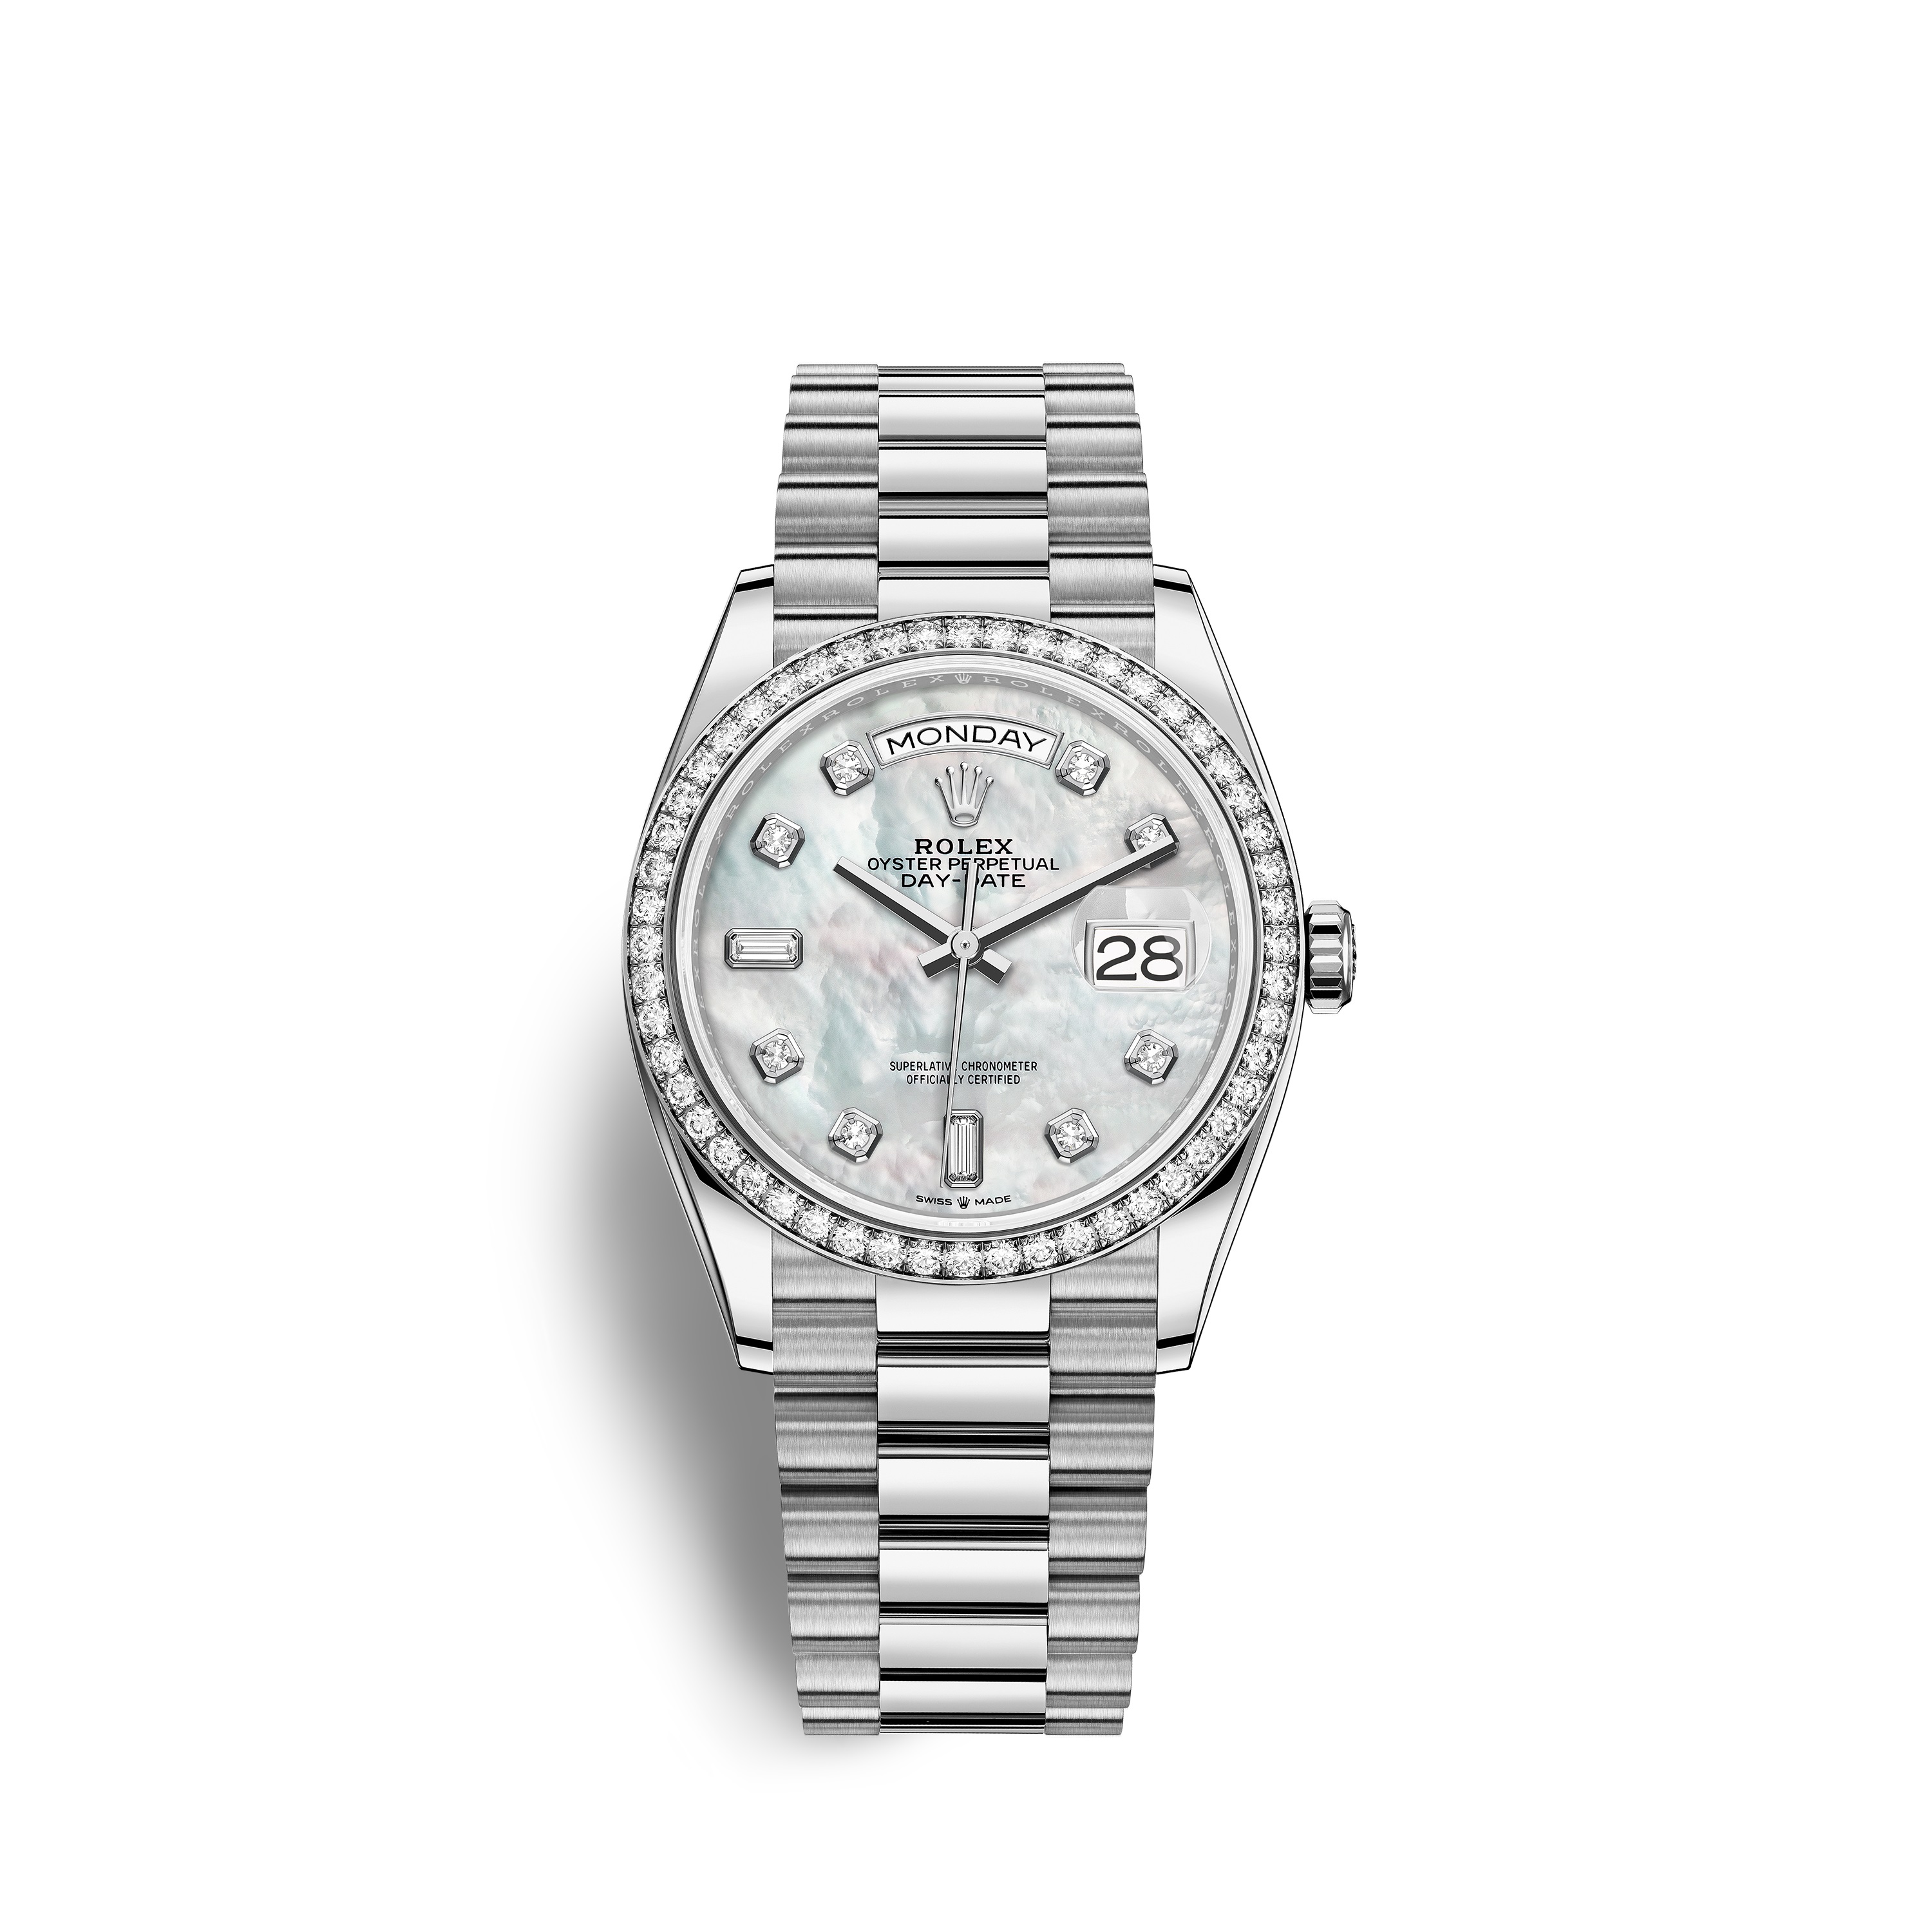 Day-Date 36 128349RBR White Gold & Diamonds Watch (White Mother-of-Pearl Set with Diamonds)